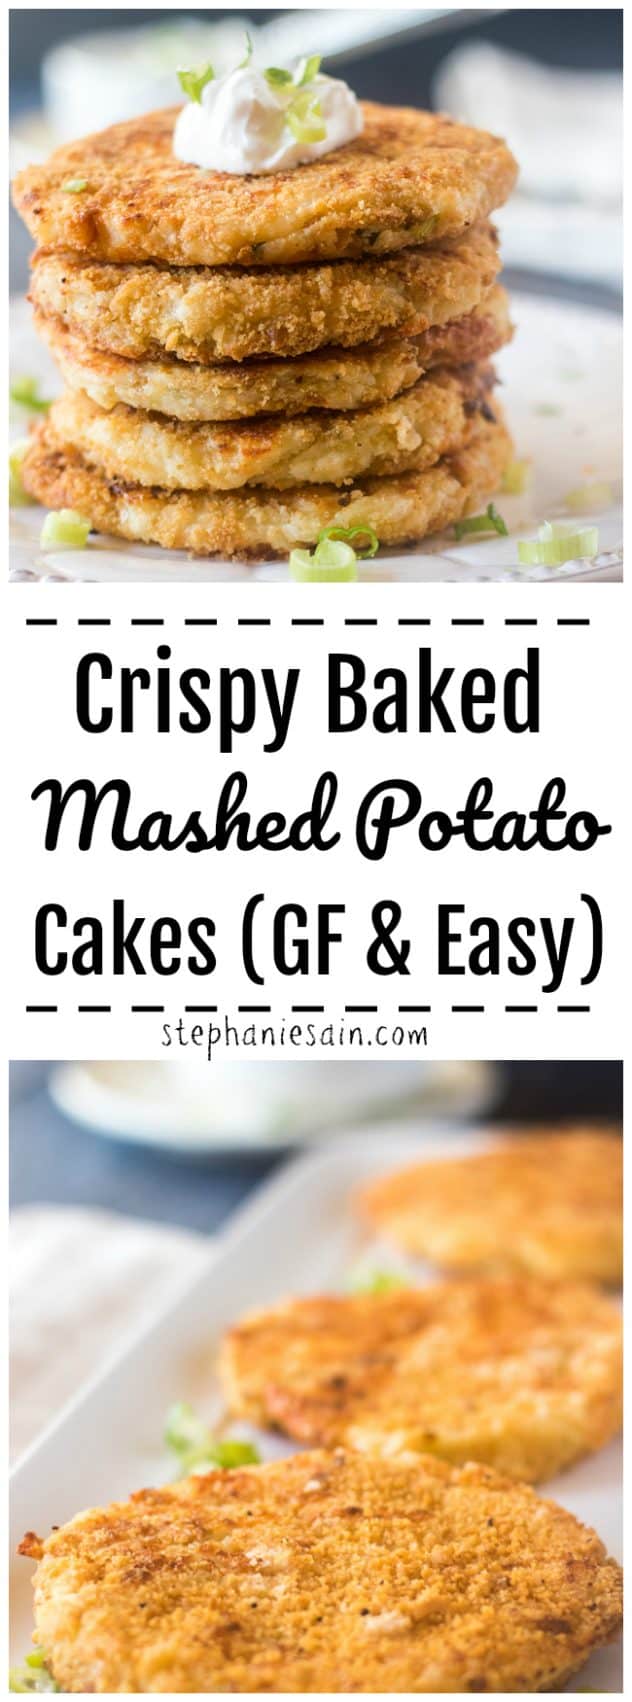 These Mashed Potato Cakes are oven baked and crispy, cheesy and perfect as a side to any meal. Also great as snack or appetizer. Only 4 ingredients needed to make this super easy delicious potato cakes. Gluten Free & Easy.